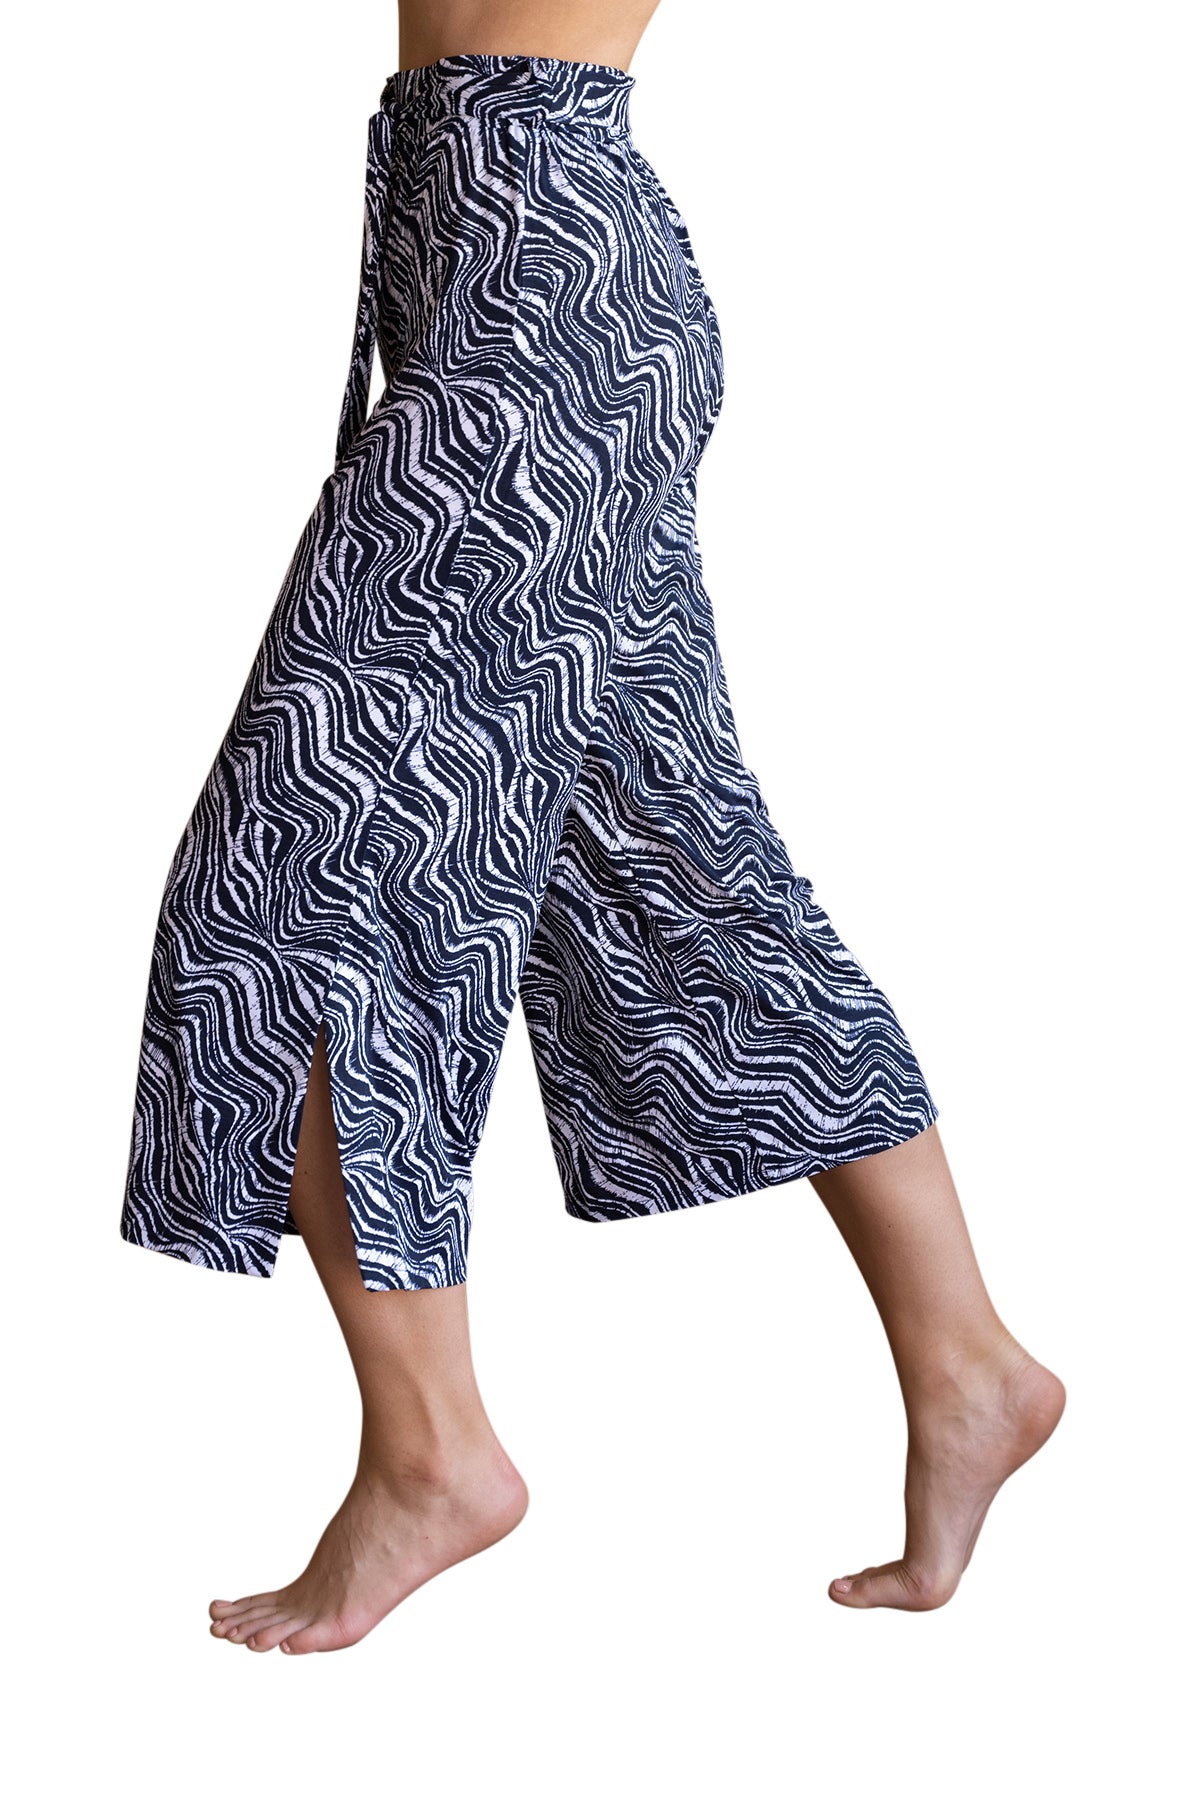 3/4 Trousers in Black/White Print